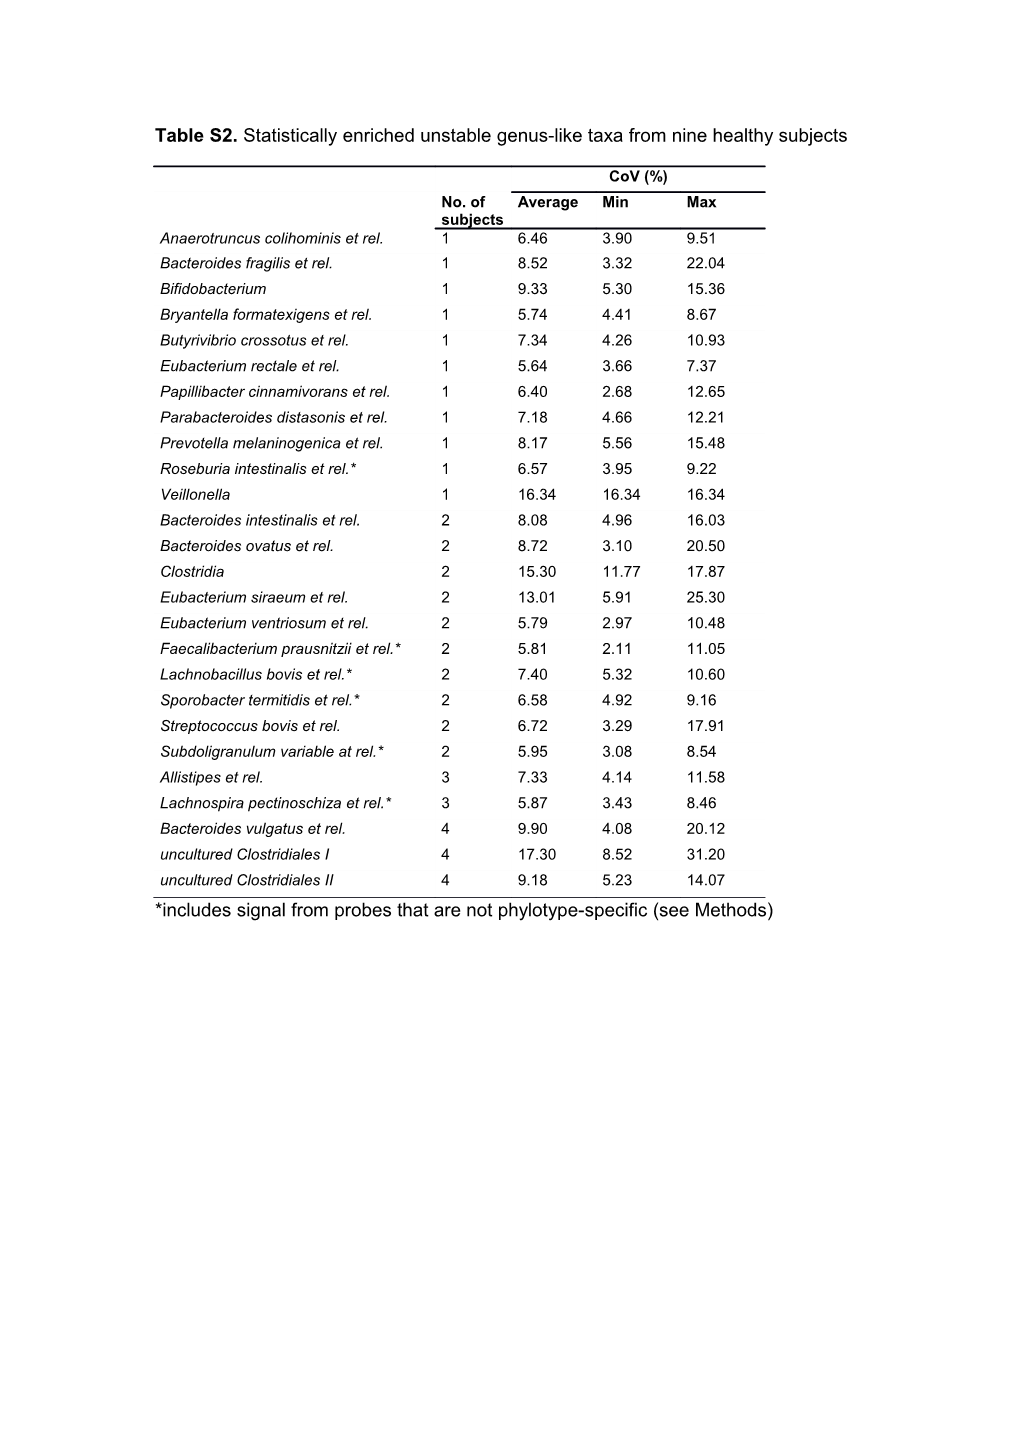 Table S2. Statistically Enriched Unstable Genus-Like Taxa from Nine Healthy Subjects